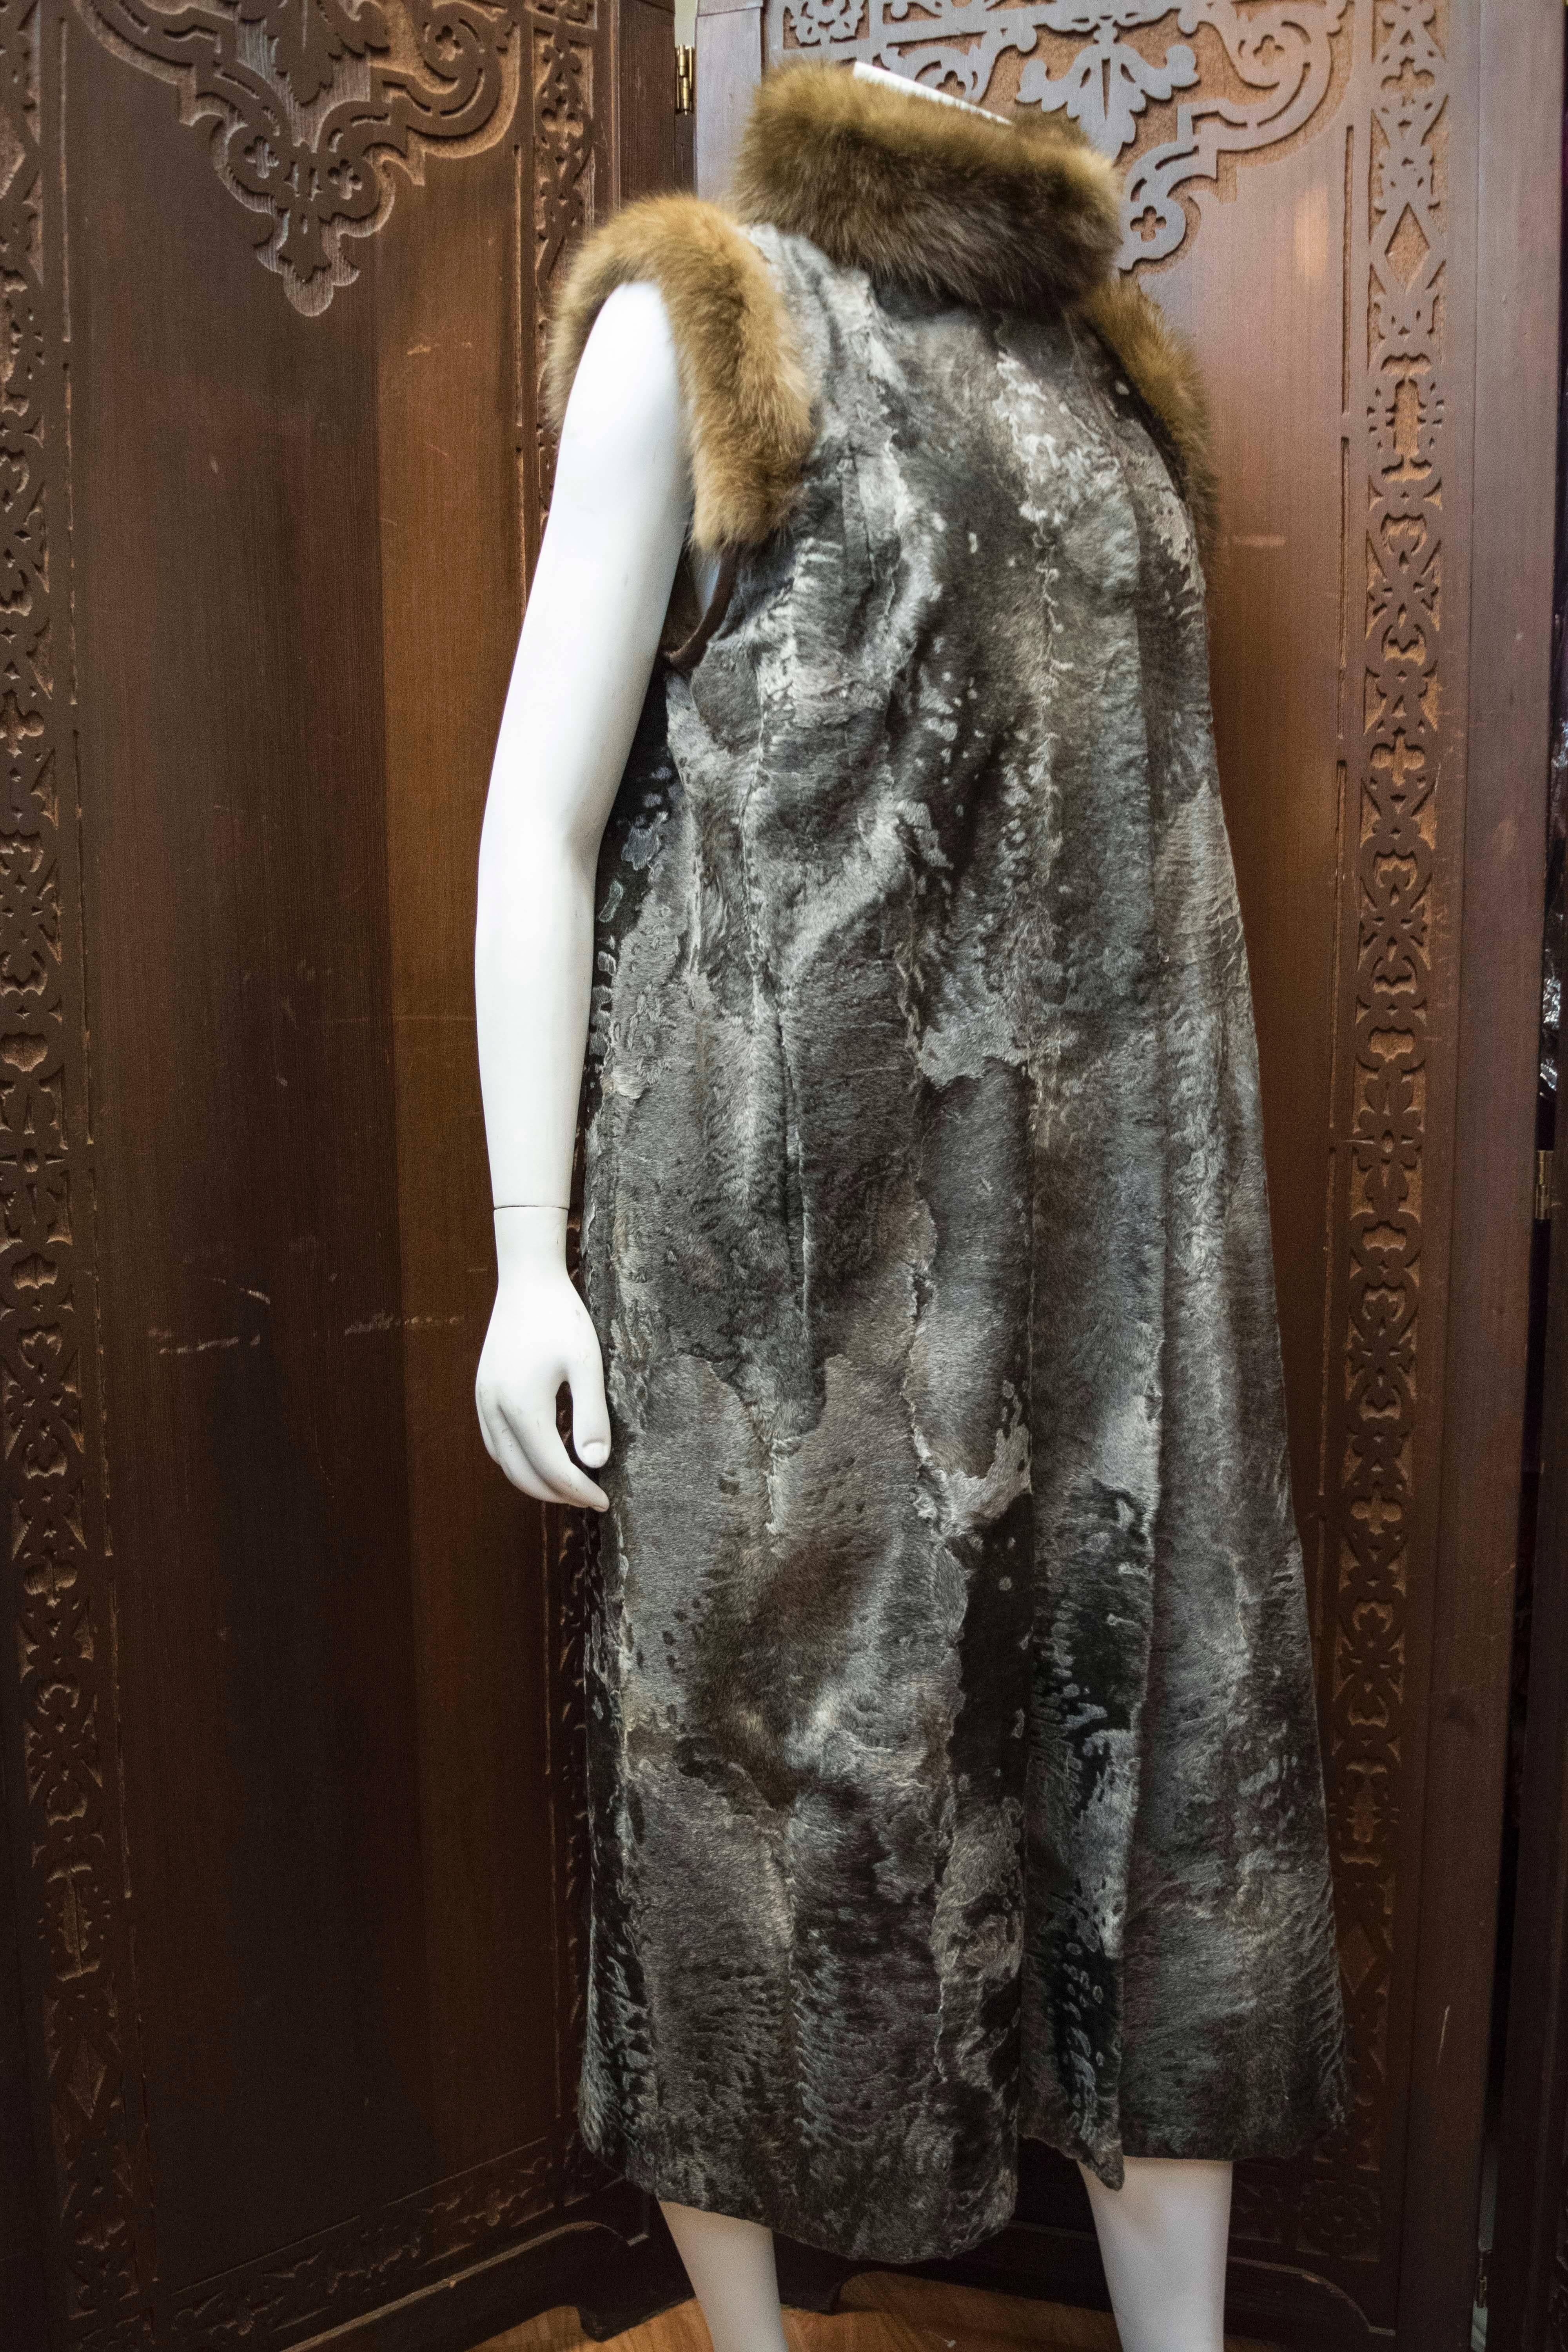 Galanos Grey Broadtail Lamb and Sable Fur Coat

This stunning Galanos coat is fashioned from light grey Broadtail lamb with light brown Sable sleeves and collar. This is a show stopping piece. 

B 42
W 40
H 46
L 50